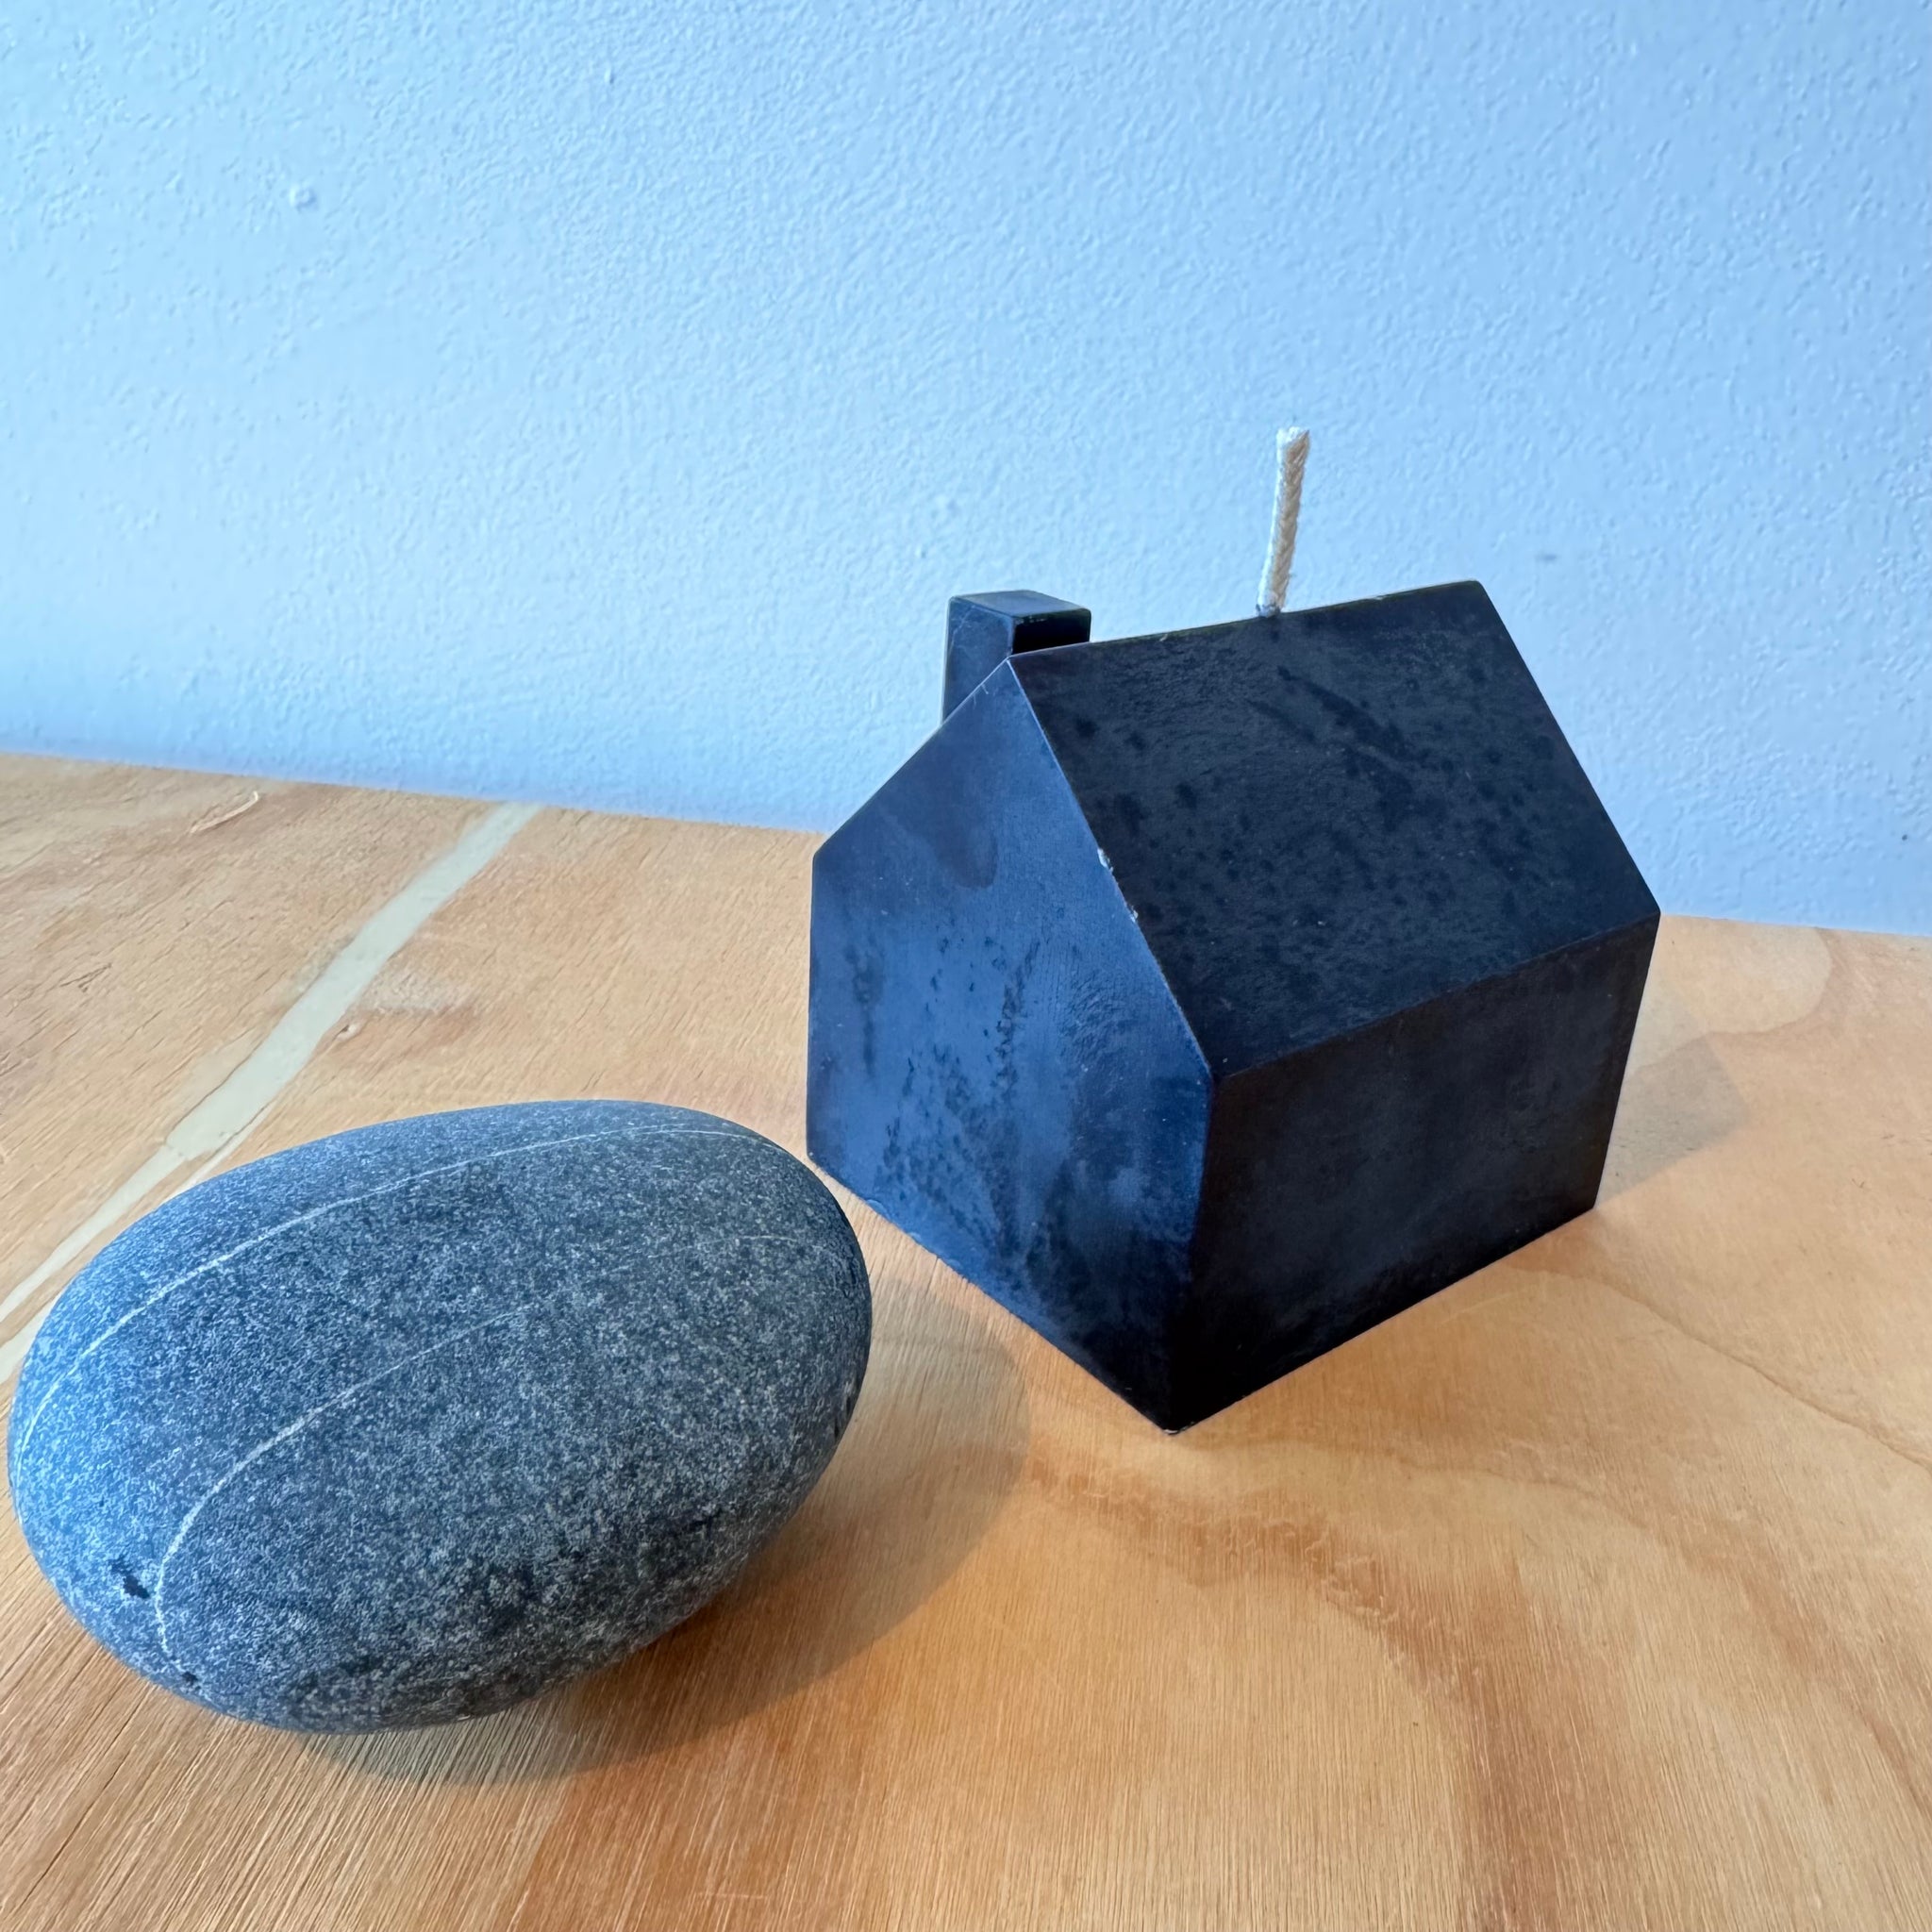 Iconic House Black Beeswax Candle